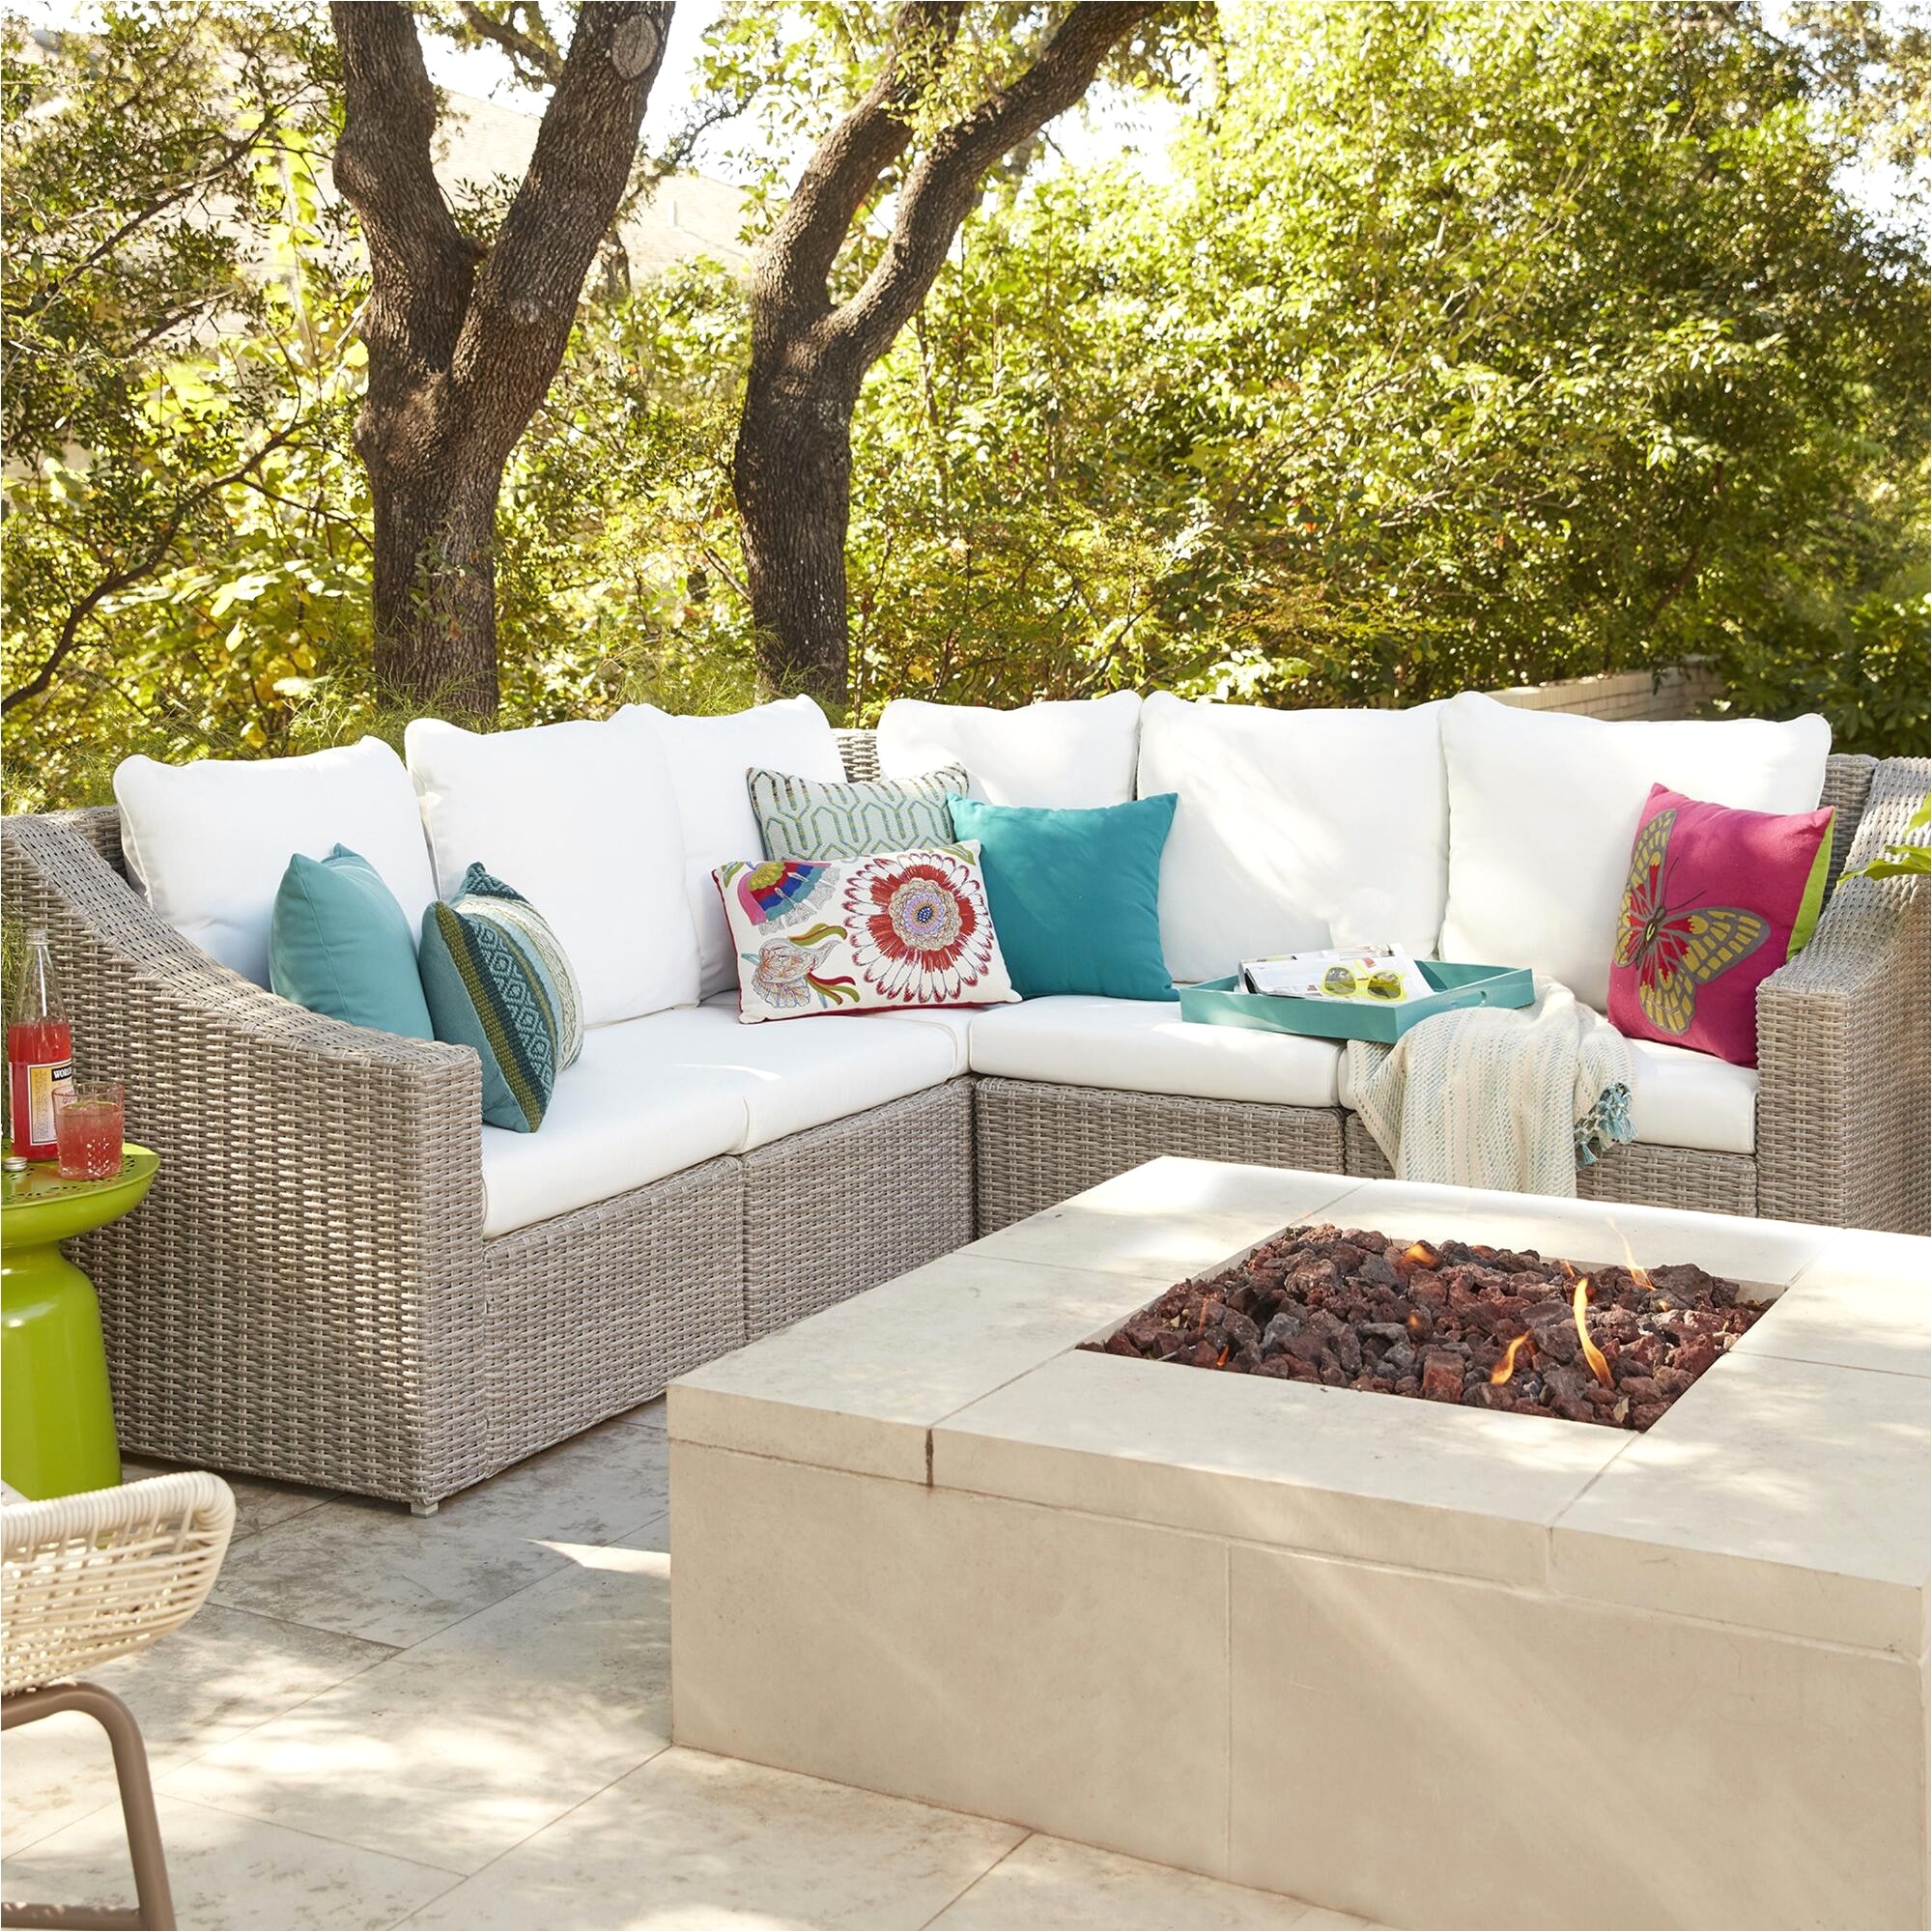 patio sectional furniture unique wicker outdoor sofa 0d patio chairs ideas outside patio furniture sale